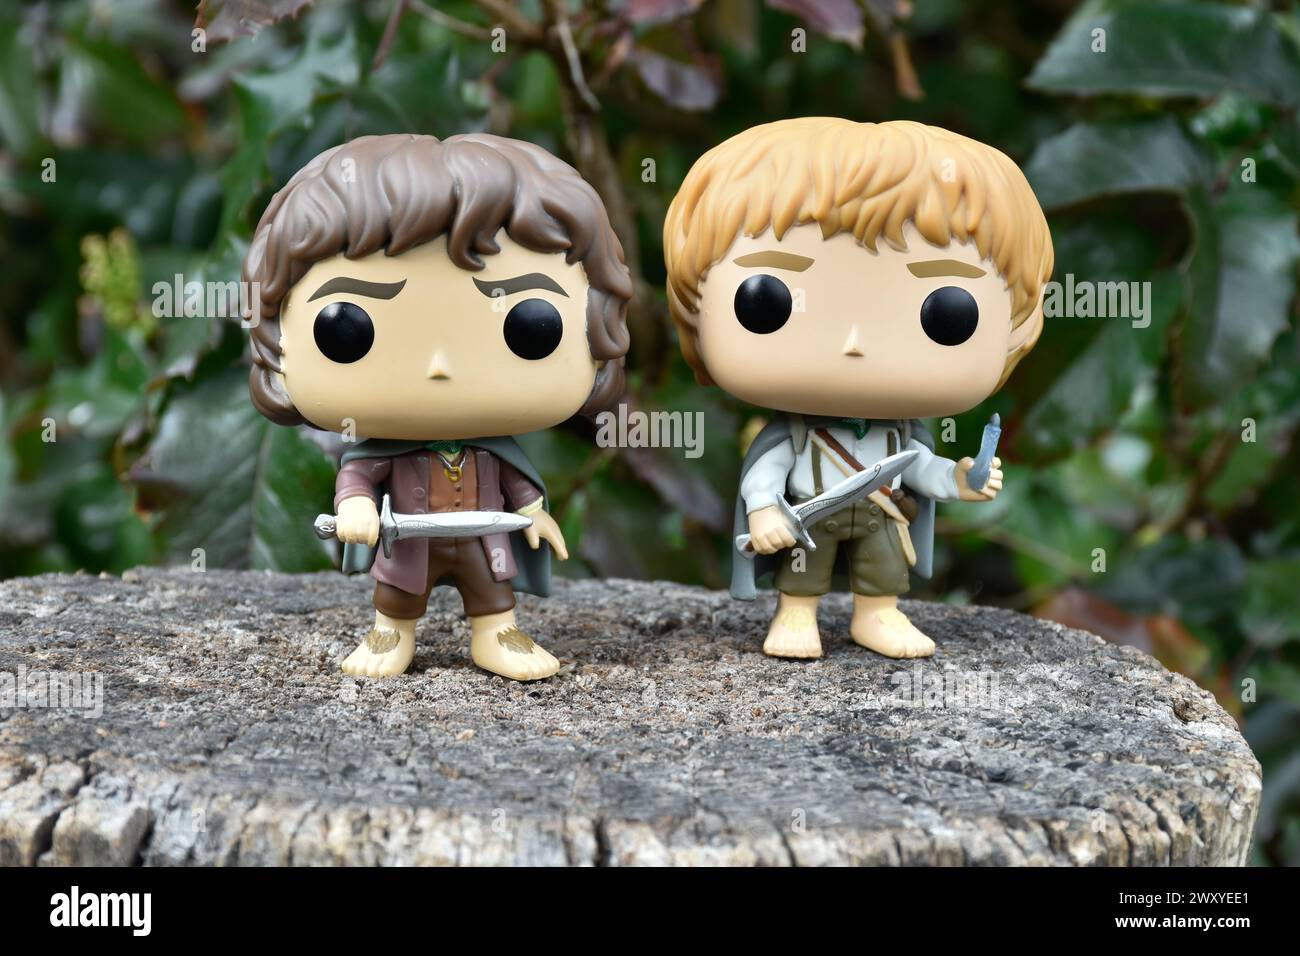 Funko Pop action figures of hobbits Frodo and Sam from fantasy movie The Lord of the Rings. Dark forest, tree stump, green leaves. Stock Photo